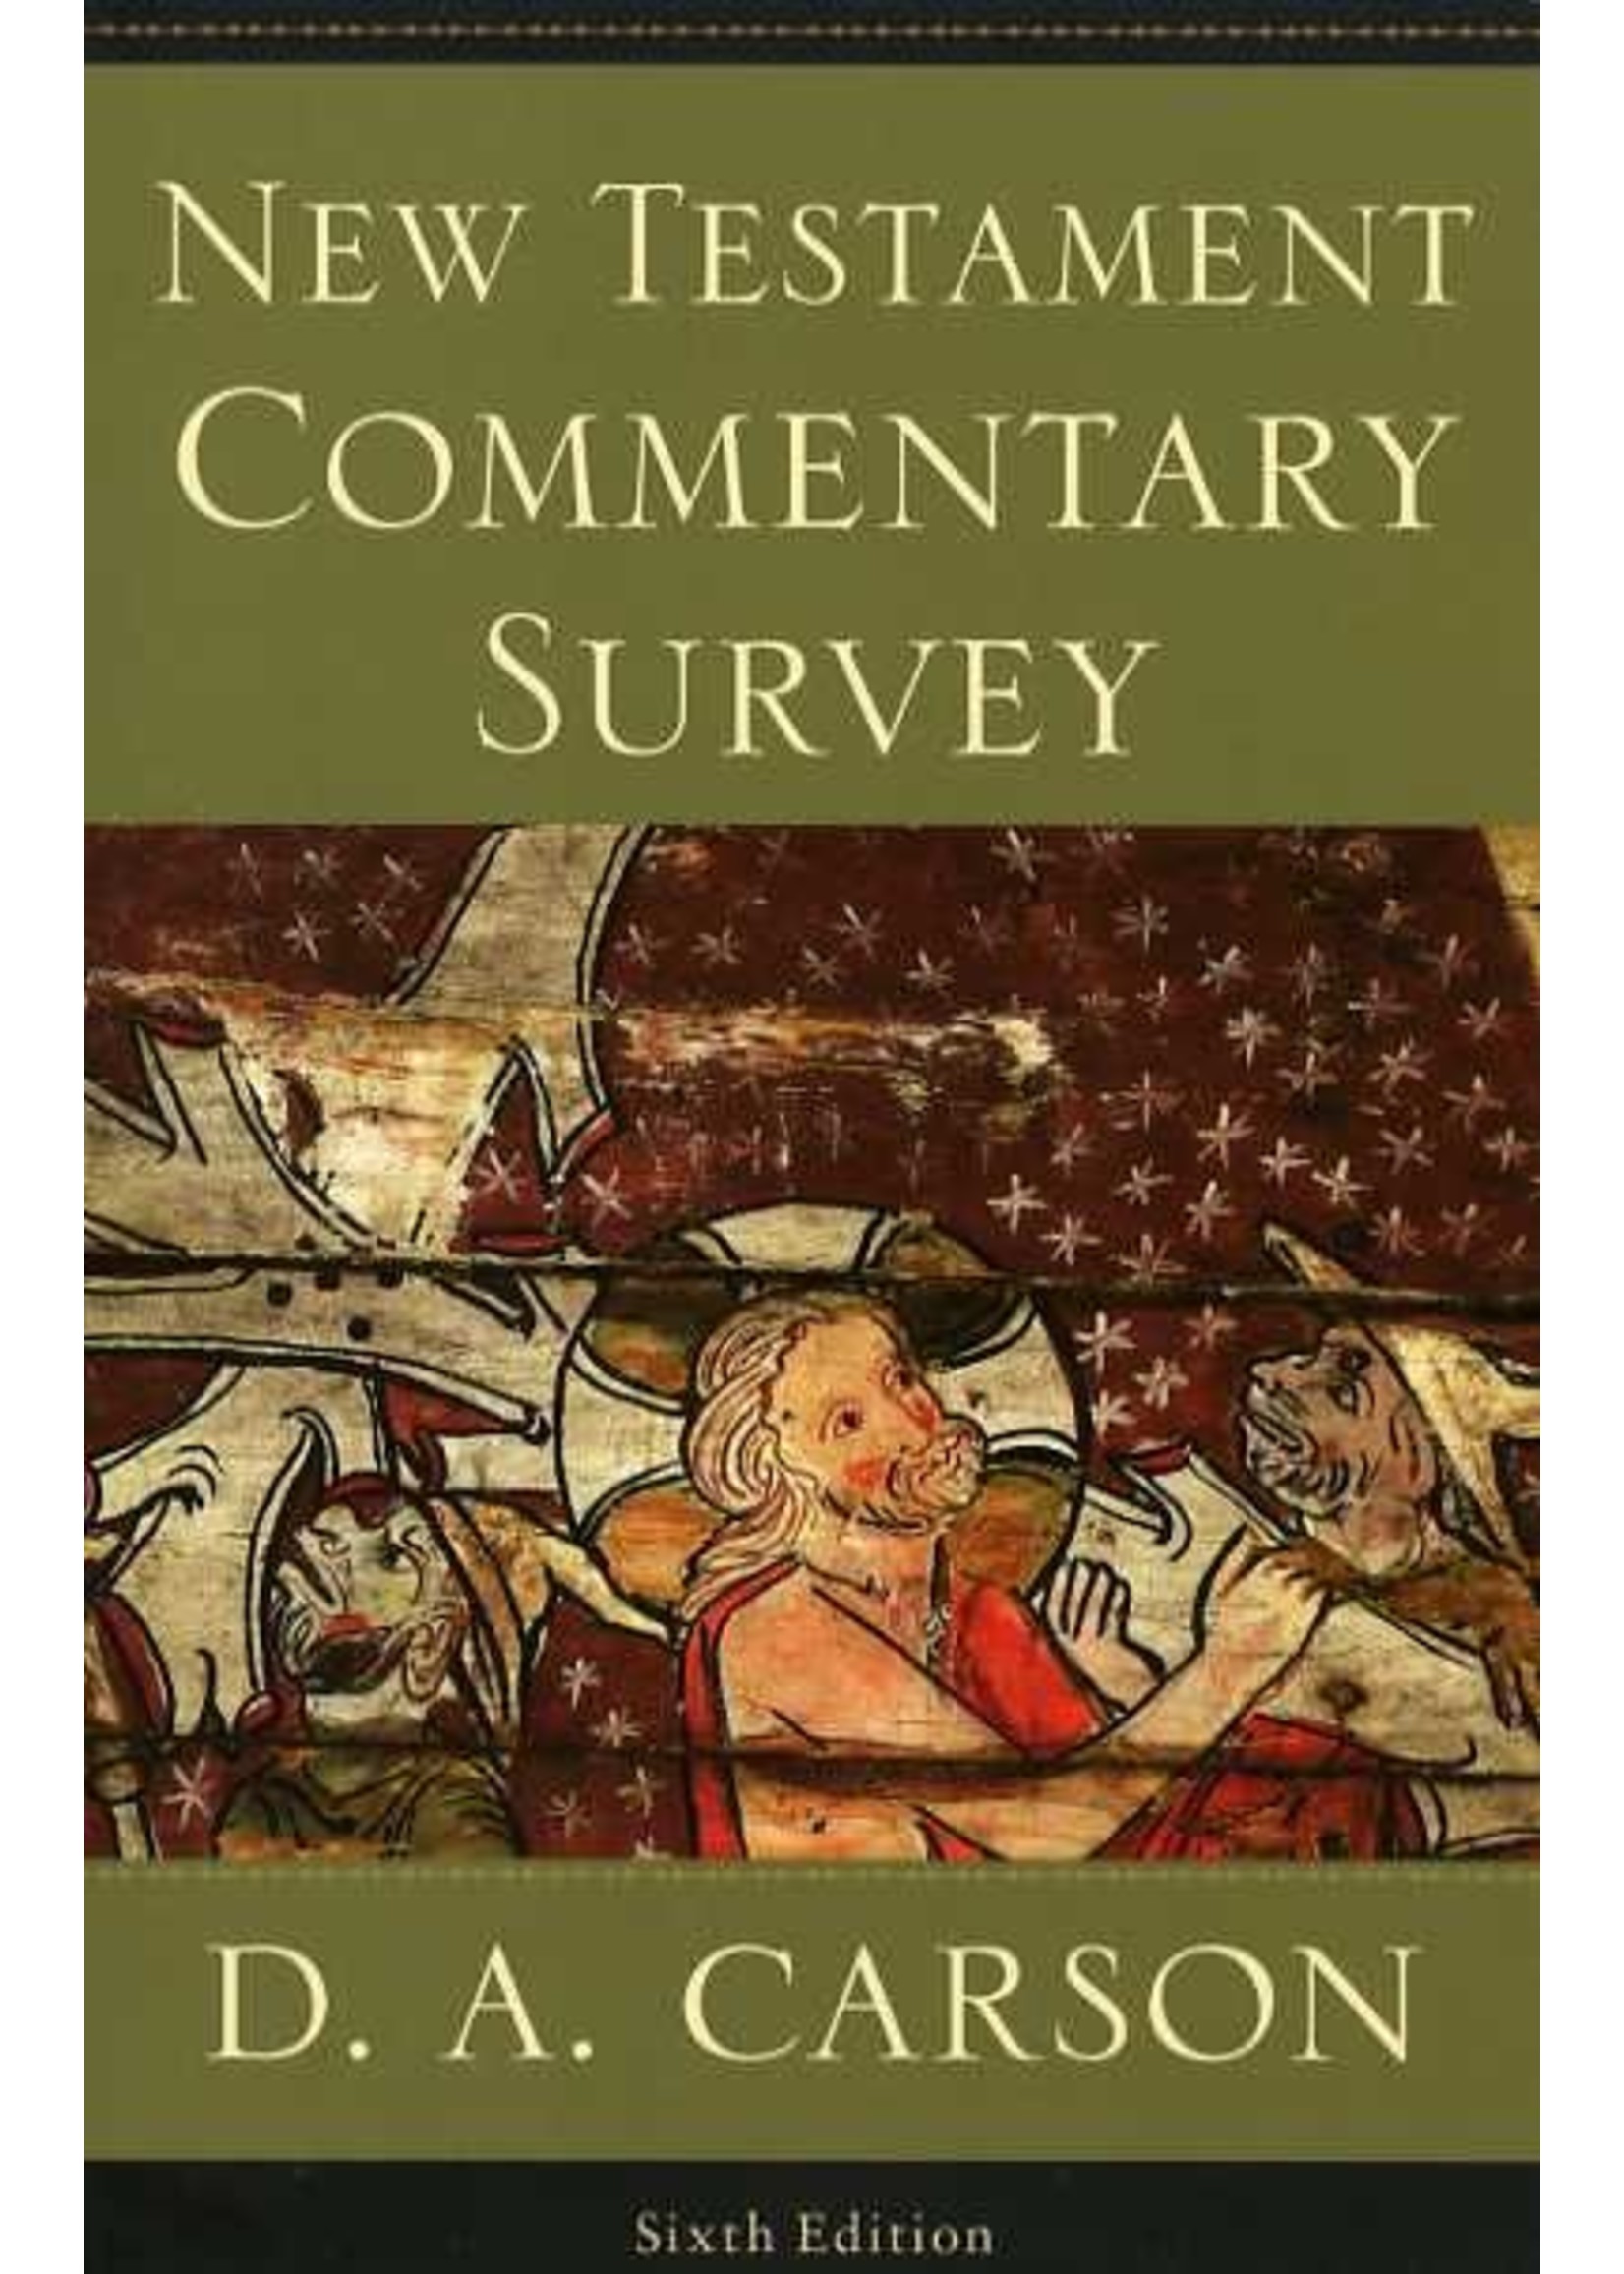 Baker Publishing New Testament Commentary Survey 6th Ed - D. A. Carson